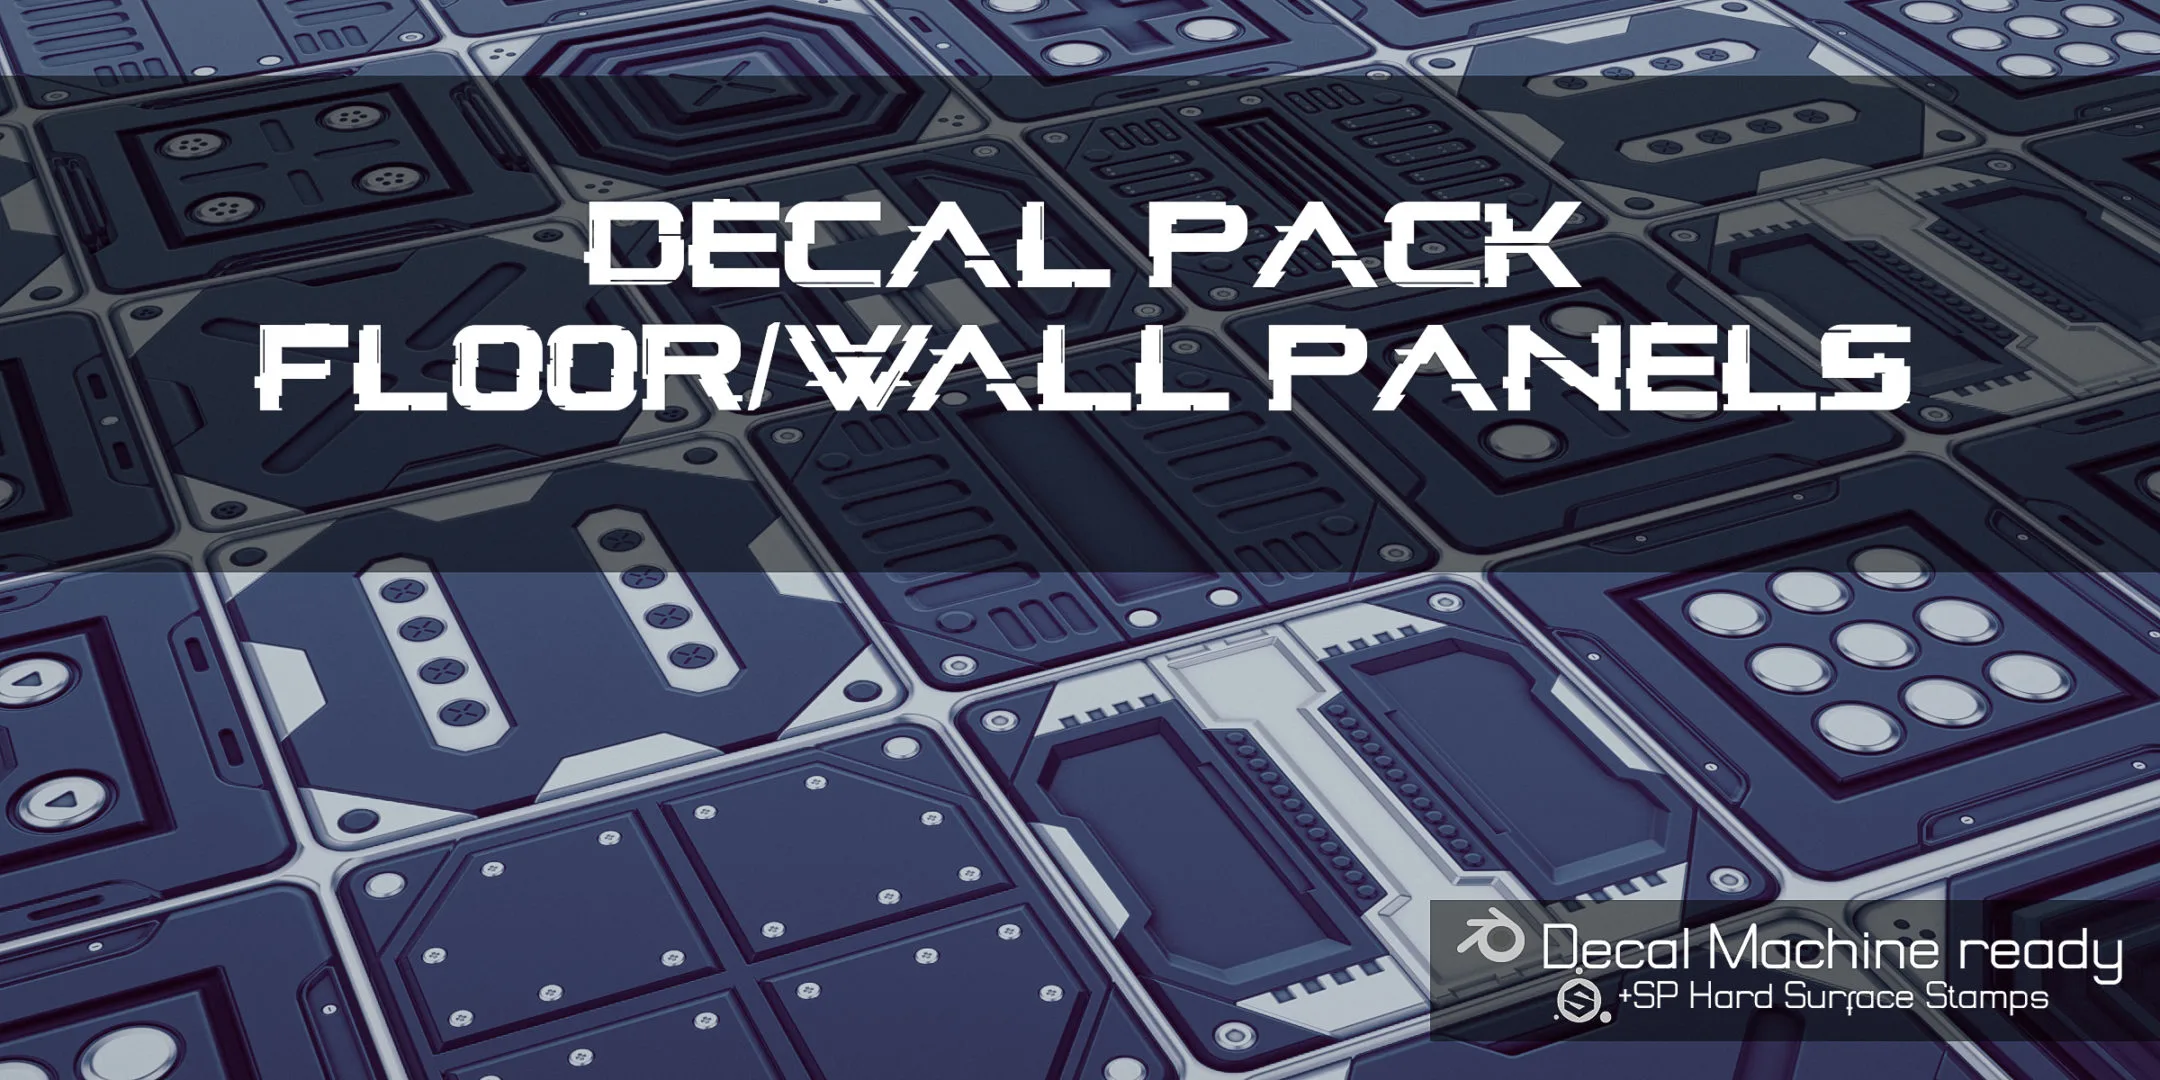 Decal Pack Floor/Wall panels | Decal Machine ready | Substance 3D Painter hard surface stamps